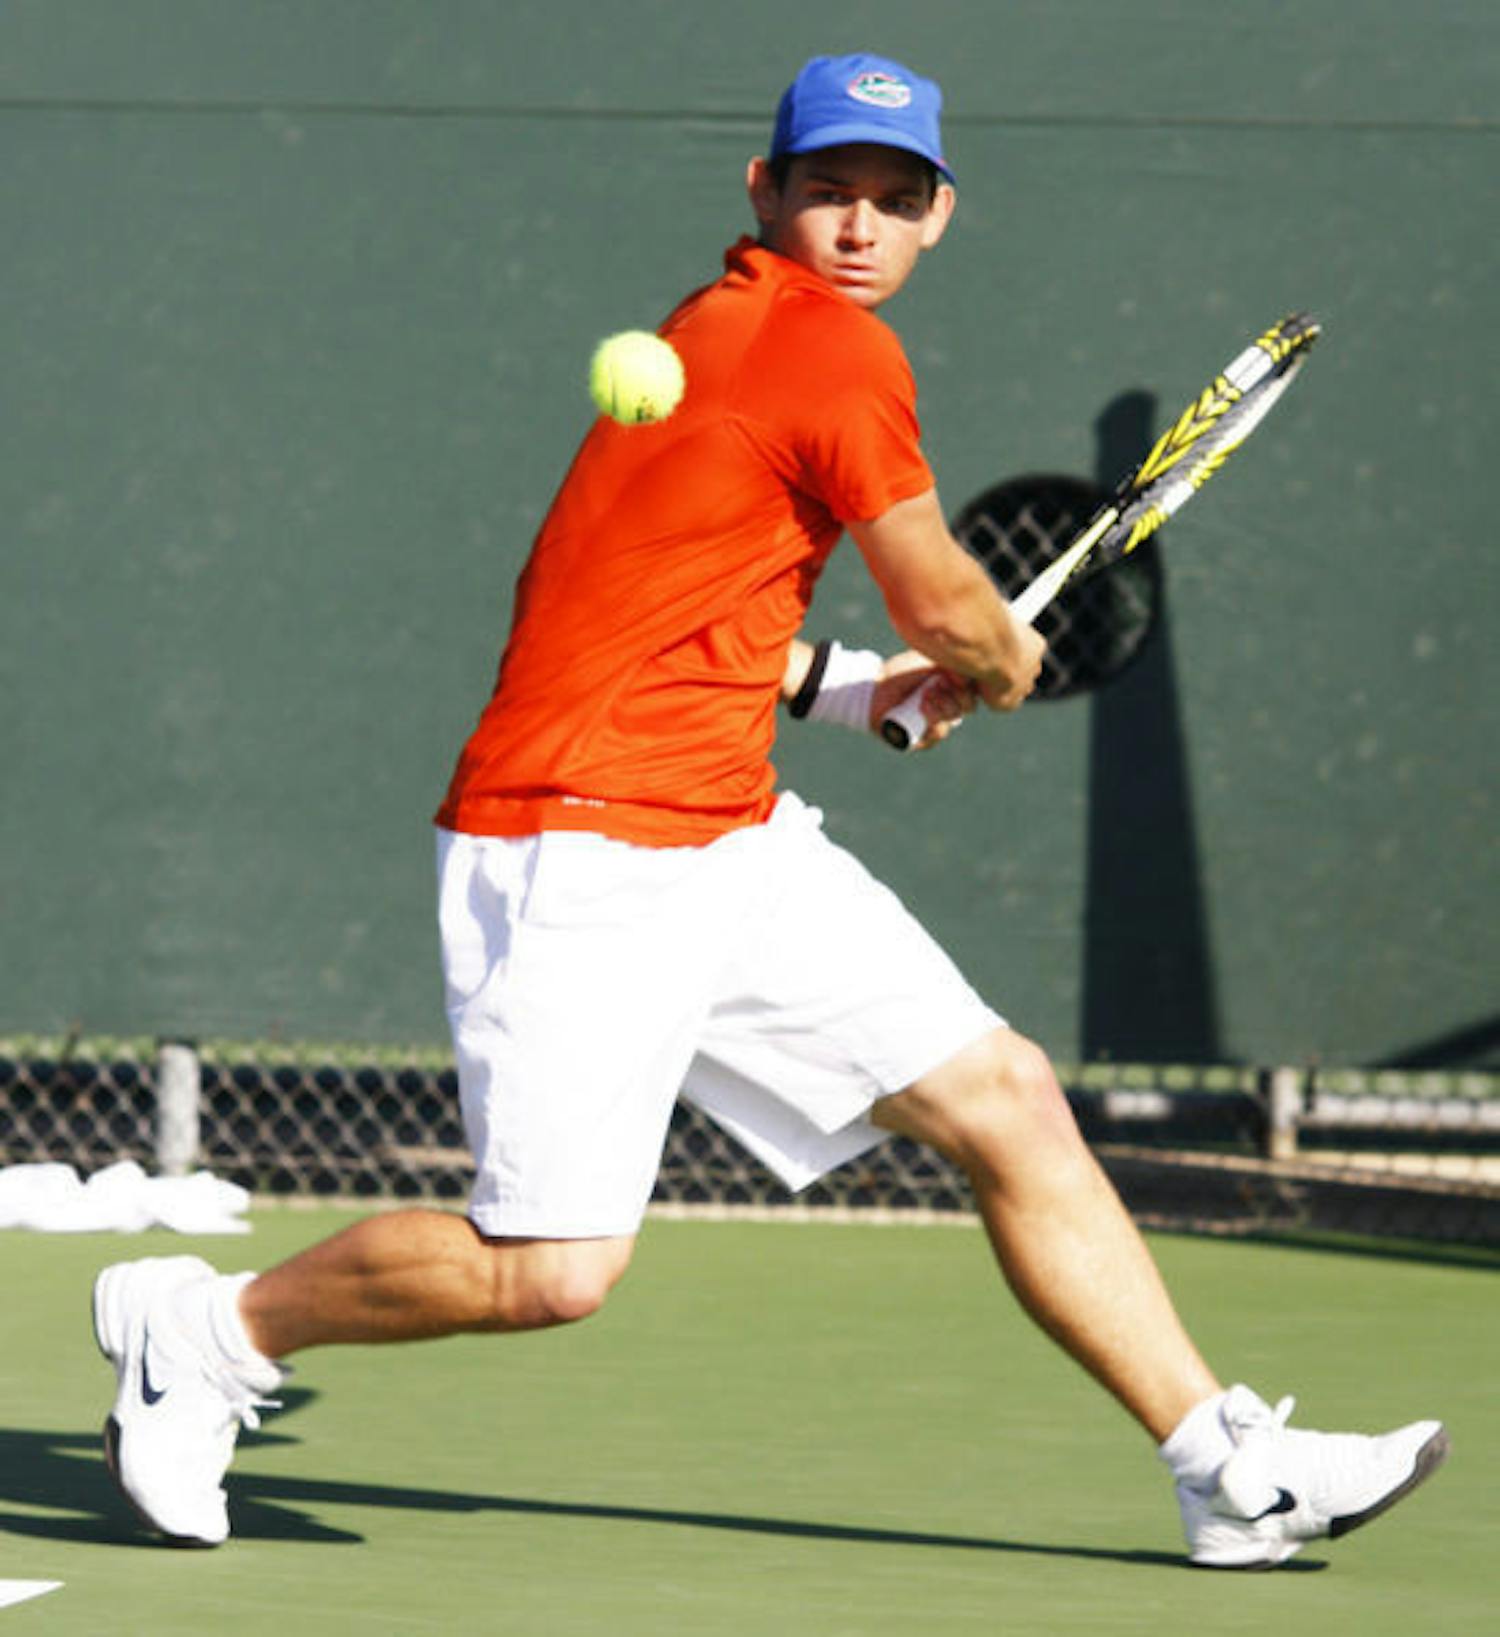 Senior Billy Federhofer prepares to backhand the ball during Florida’s 7-0 win against St. John’s on Jan. 26 at Linder Stadium. Federhofer dropped his last set 1-6 to end the Gators' 4-3 loss in the NCAA Tournament on Friday.